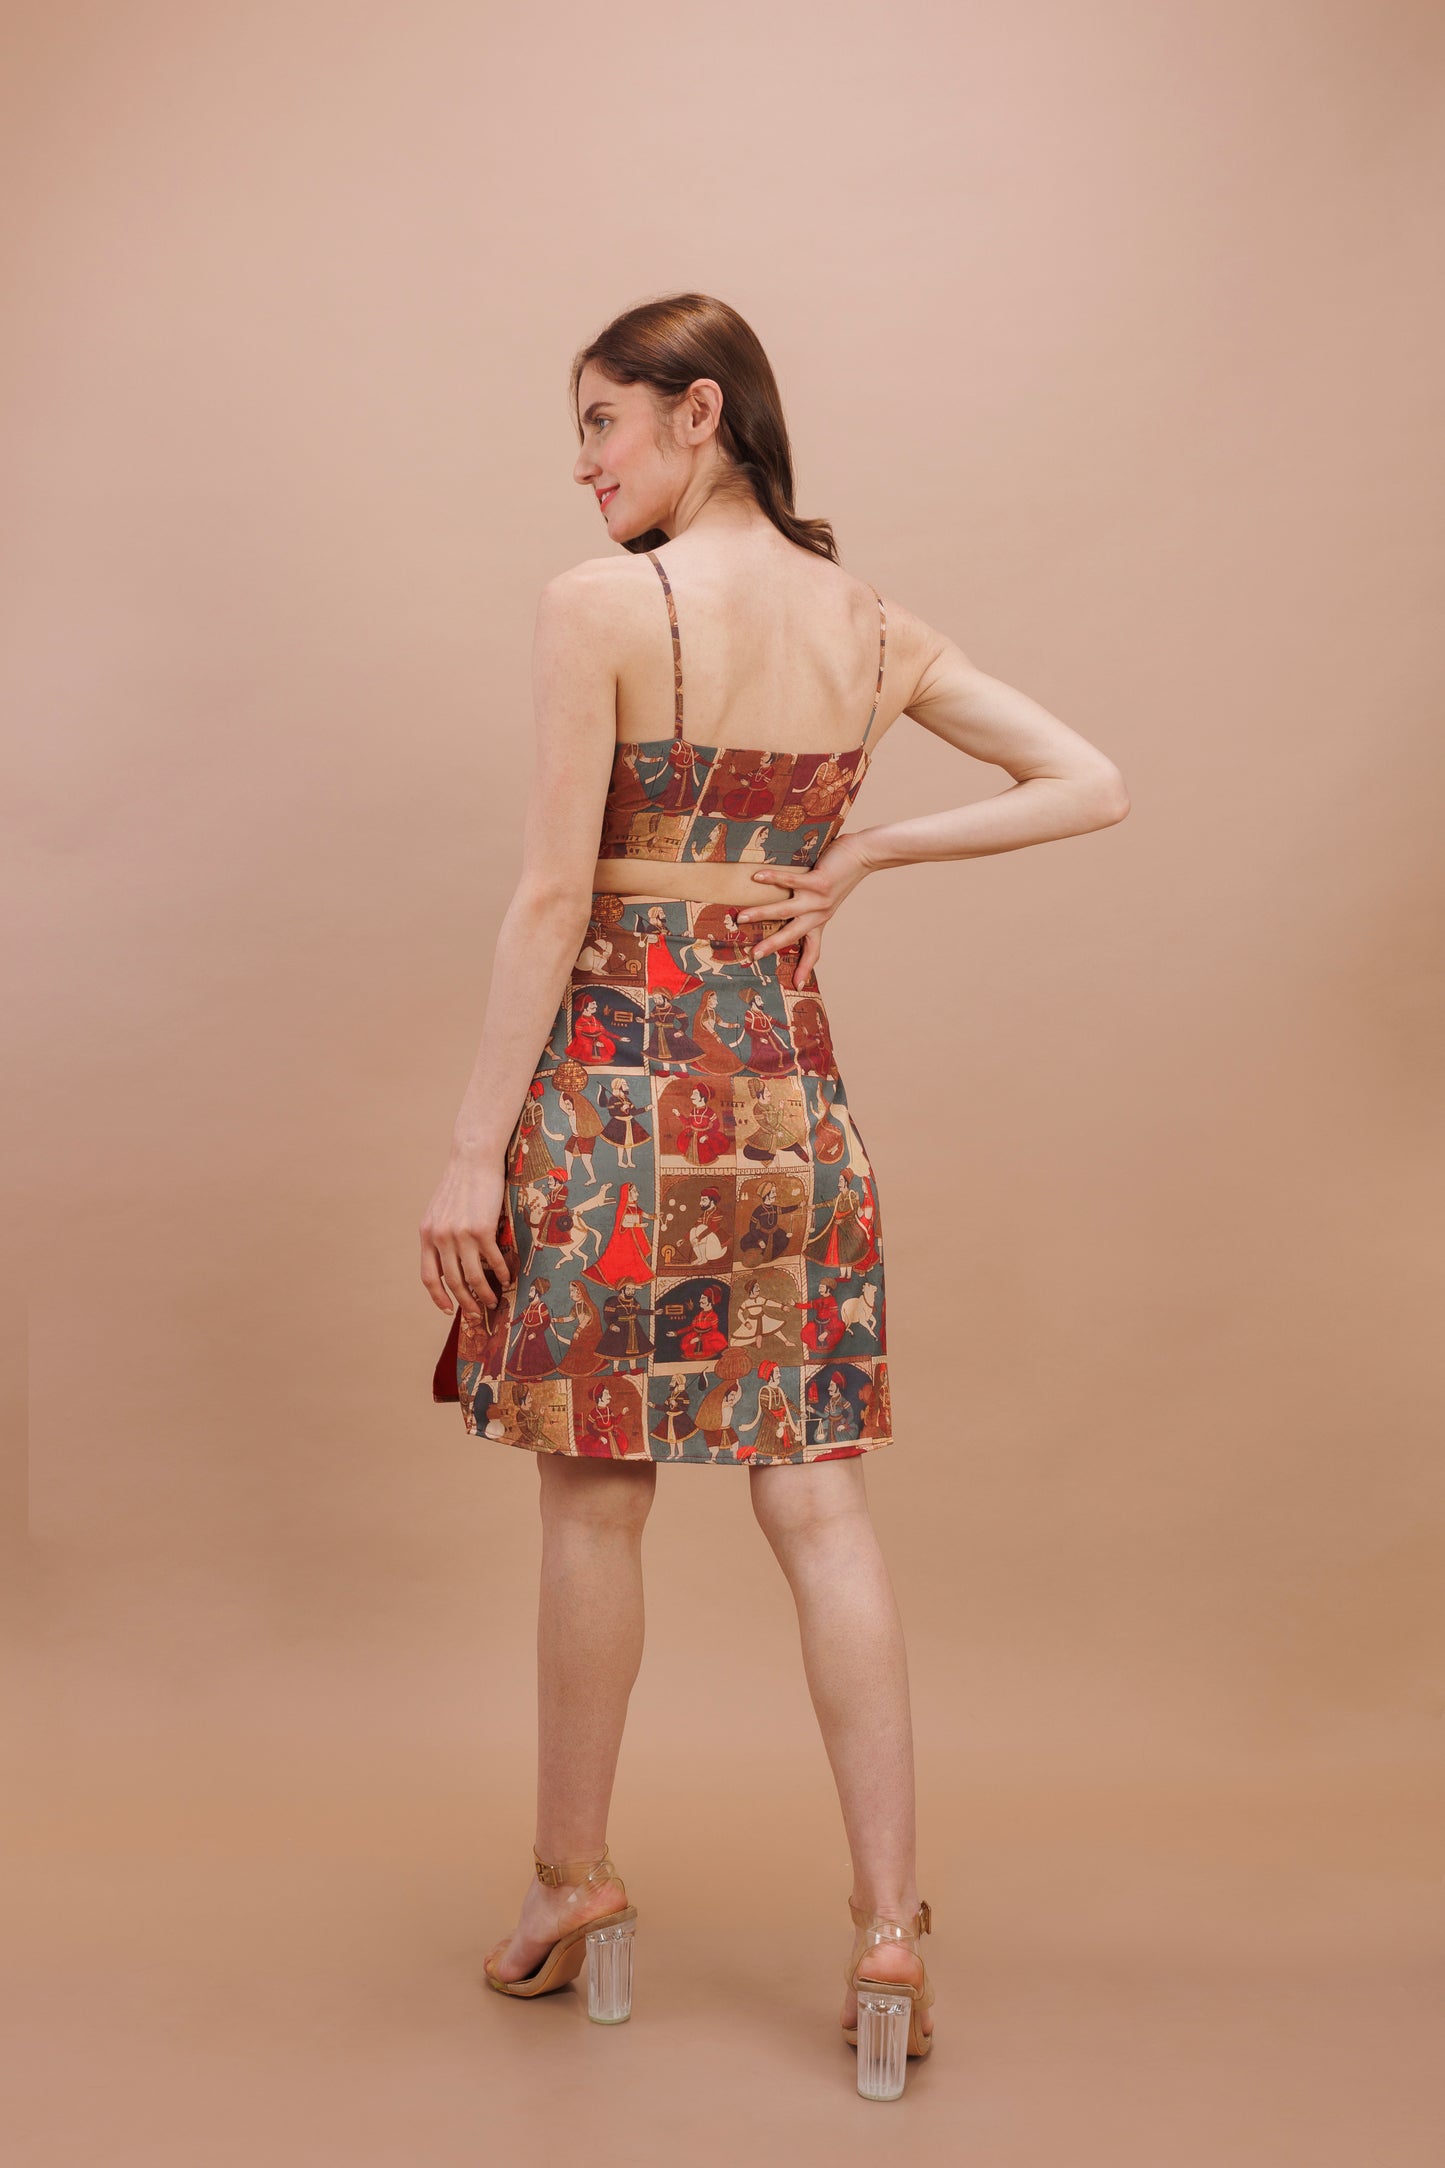 "Cairo printed skirt and bustier set"